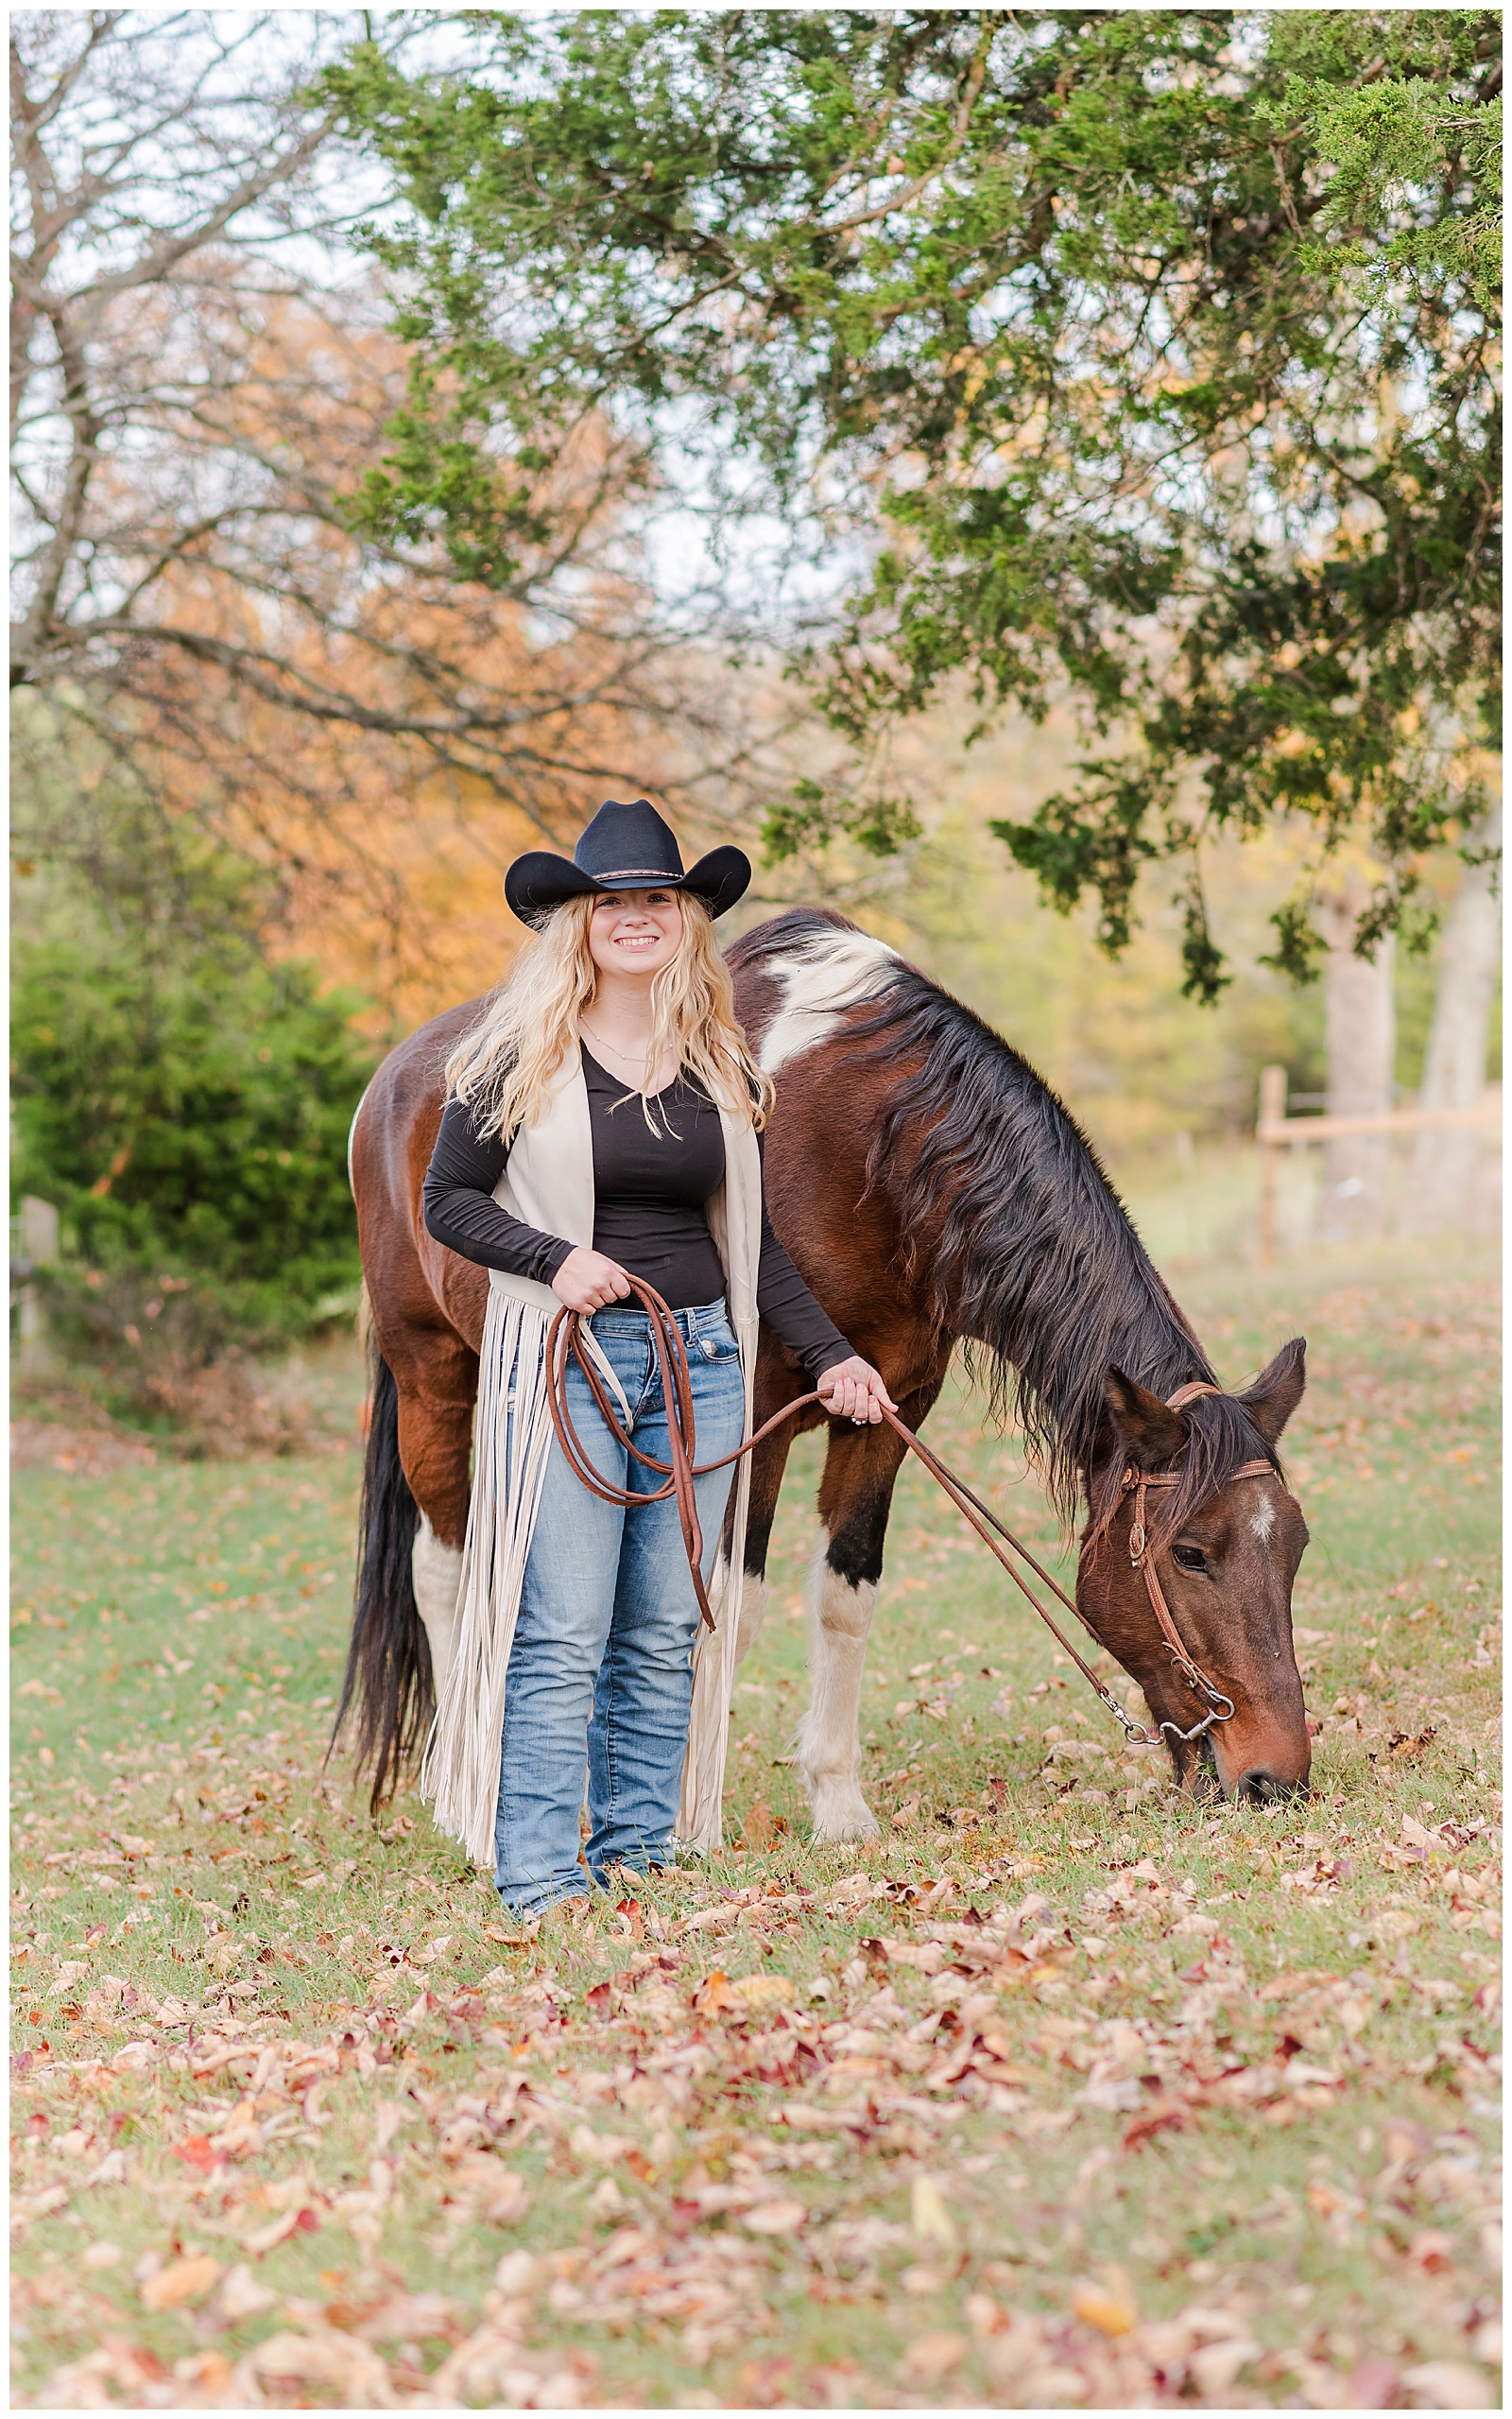 Nashville girl wearing a black cowgirl hat, standing next to a horse during her Equine Senior Session.